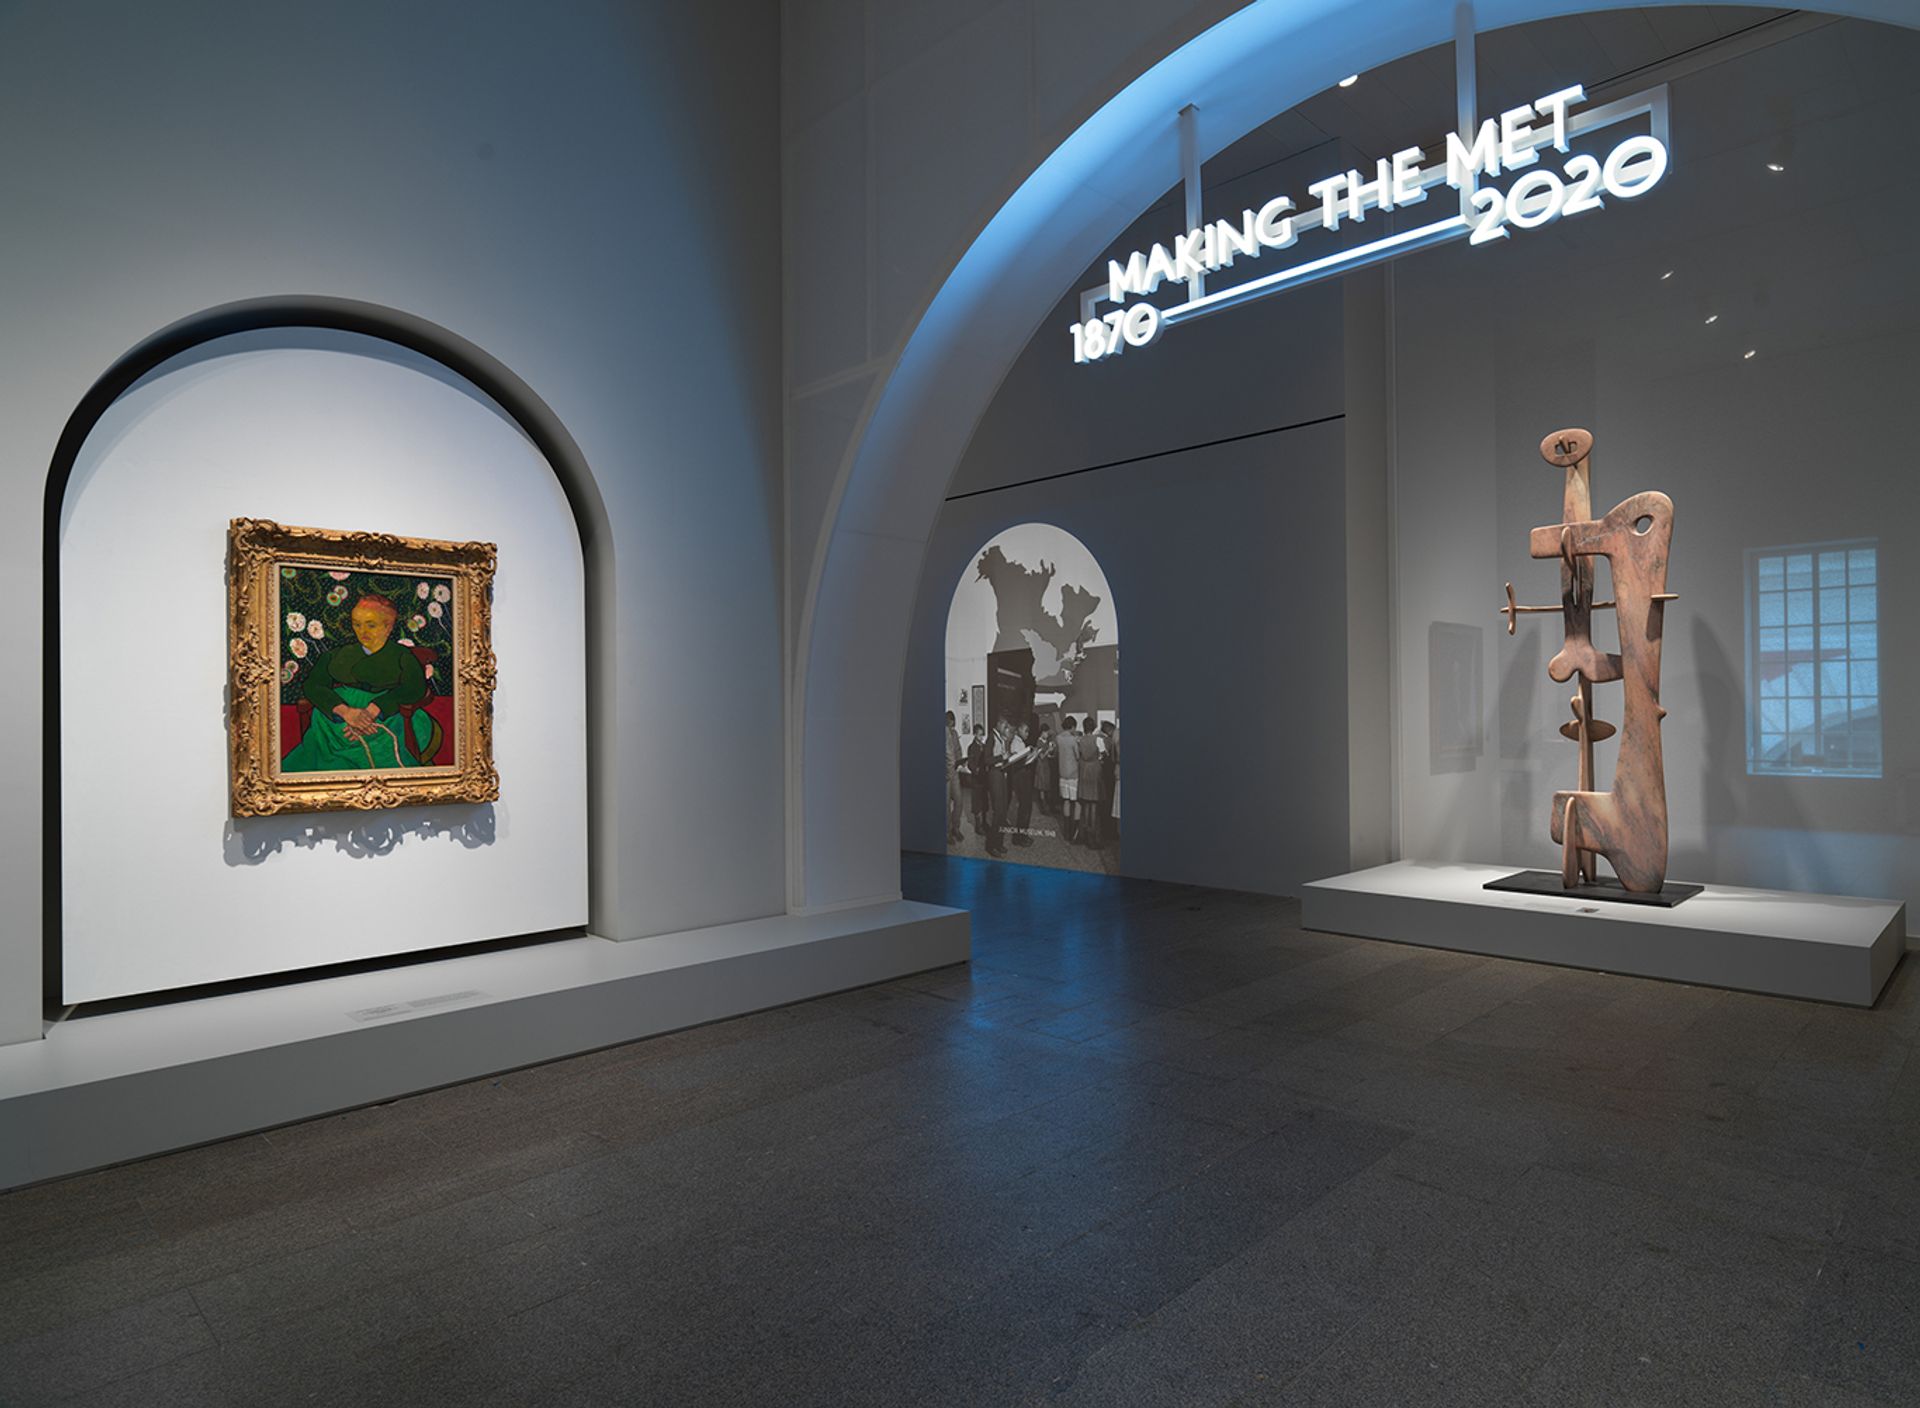 Installation view of Making the Met, 1870-2020, at the new reopened Metropolitan Museum of Art Courtesy of the Metropolitan Museum of Art